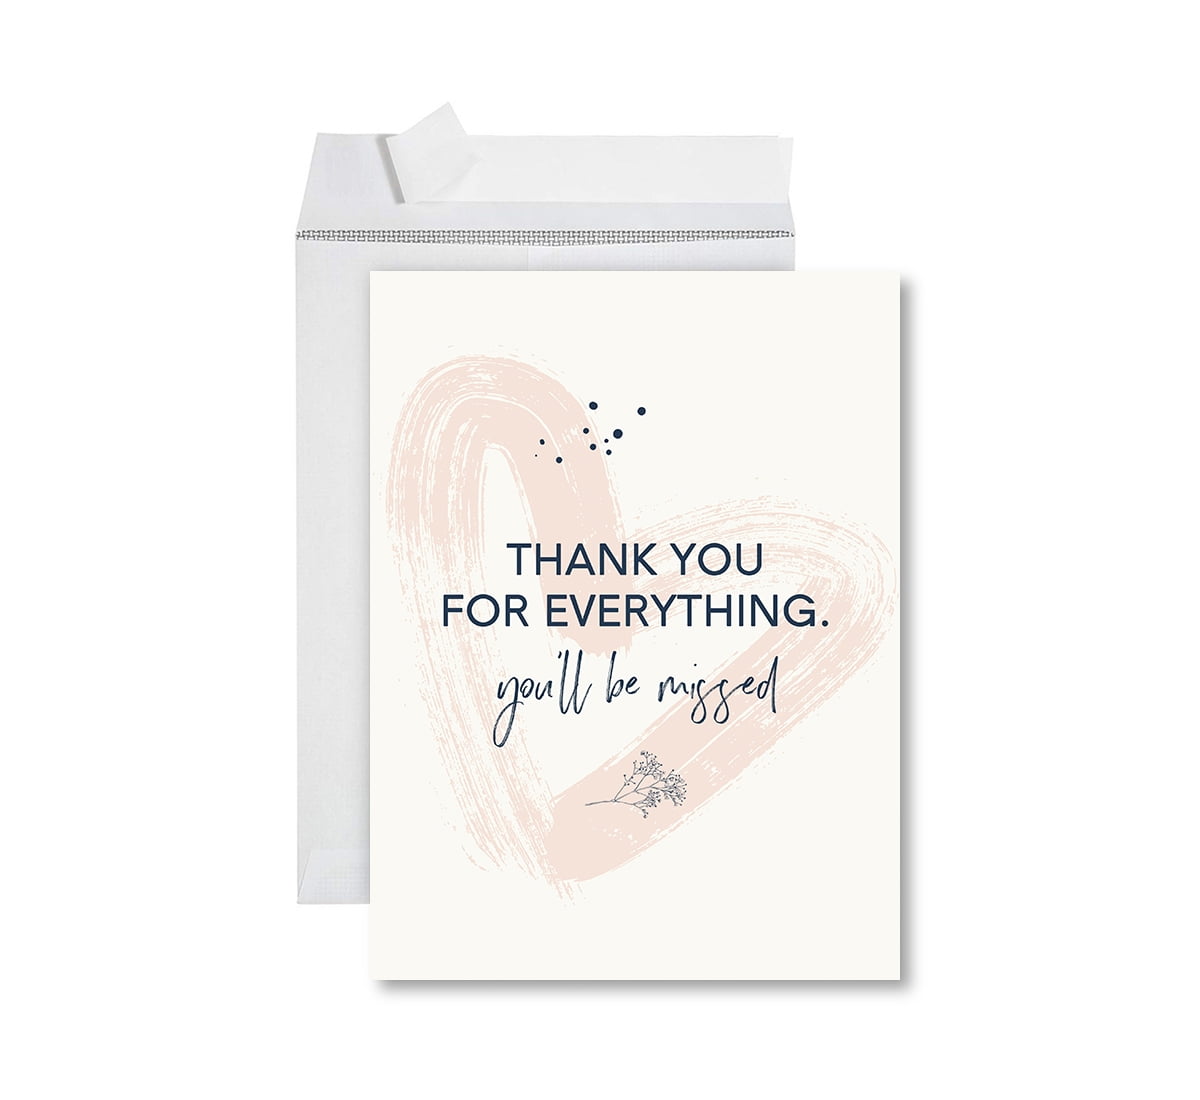 THANK YOU Message (thanks message good bye card the end) Stock